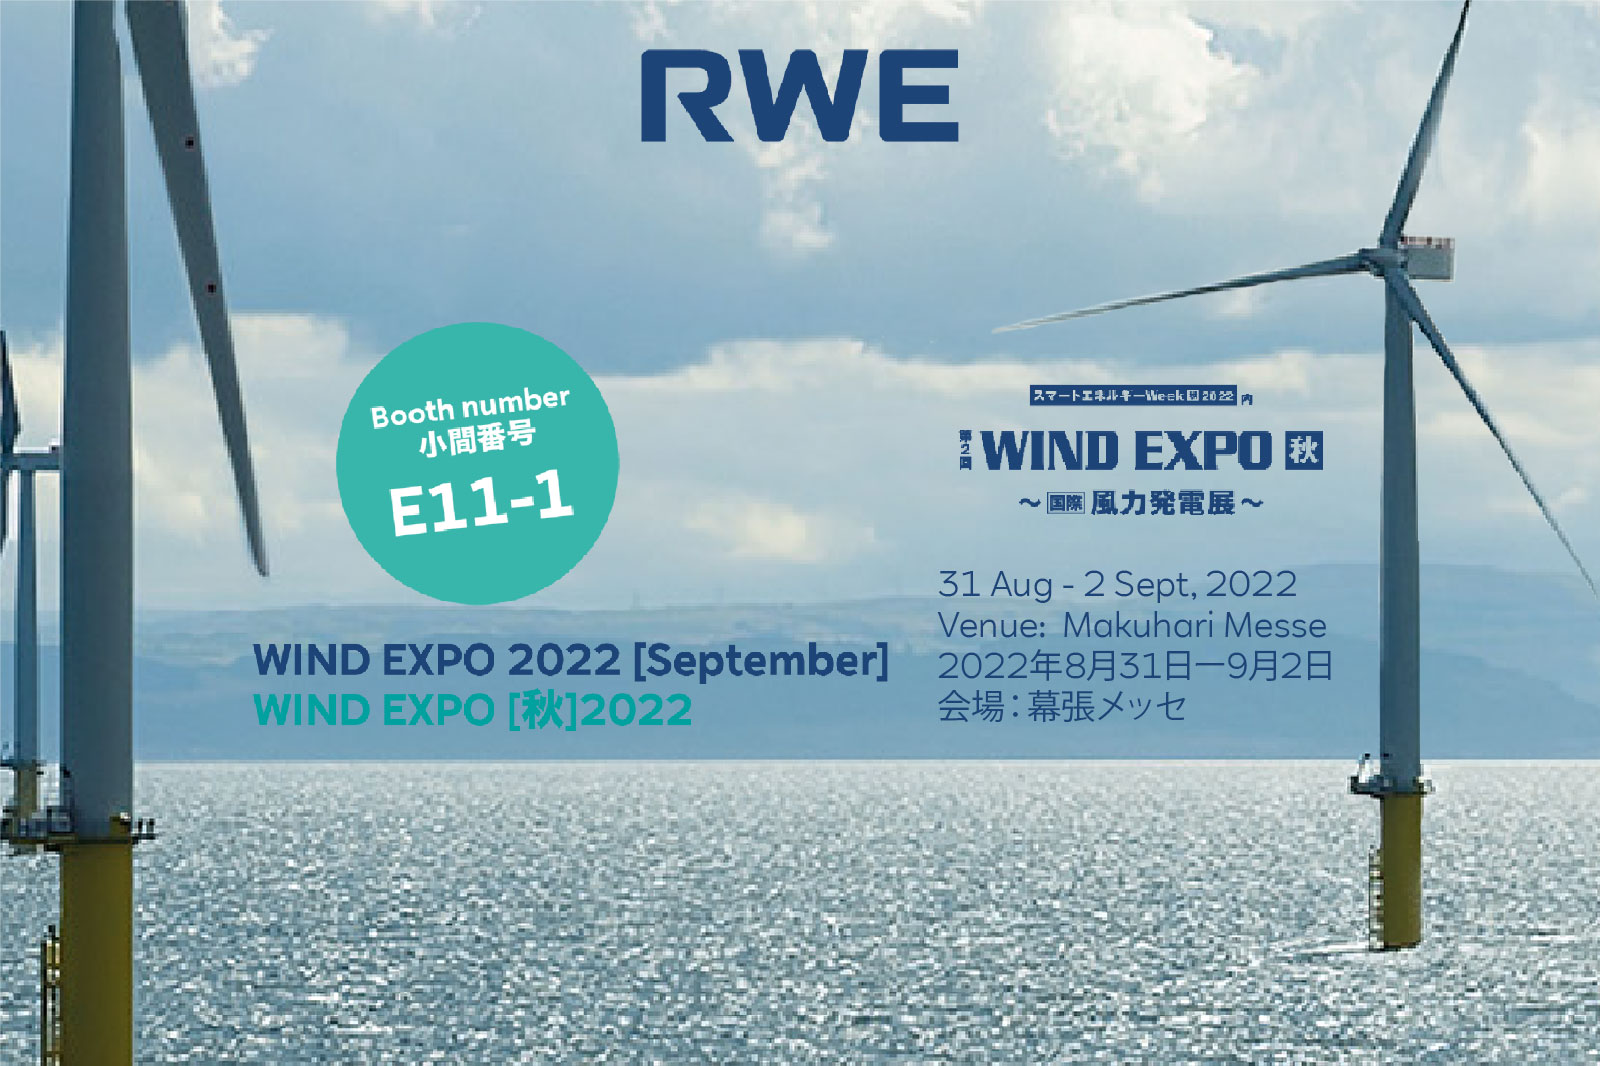 RWE is taking part in Japan’s largest annual energy trade exhibition